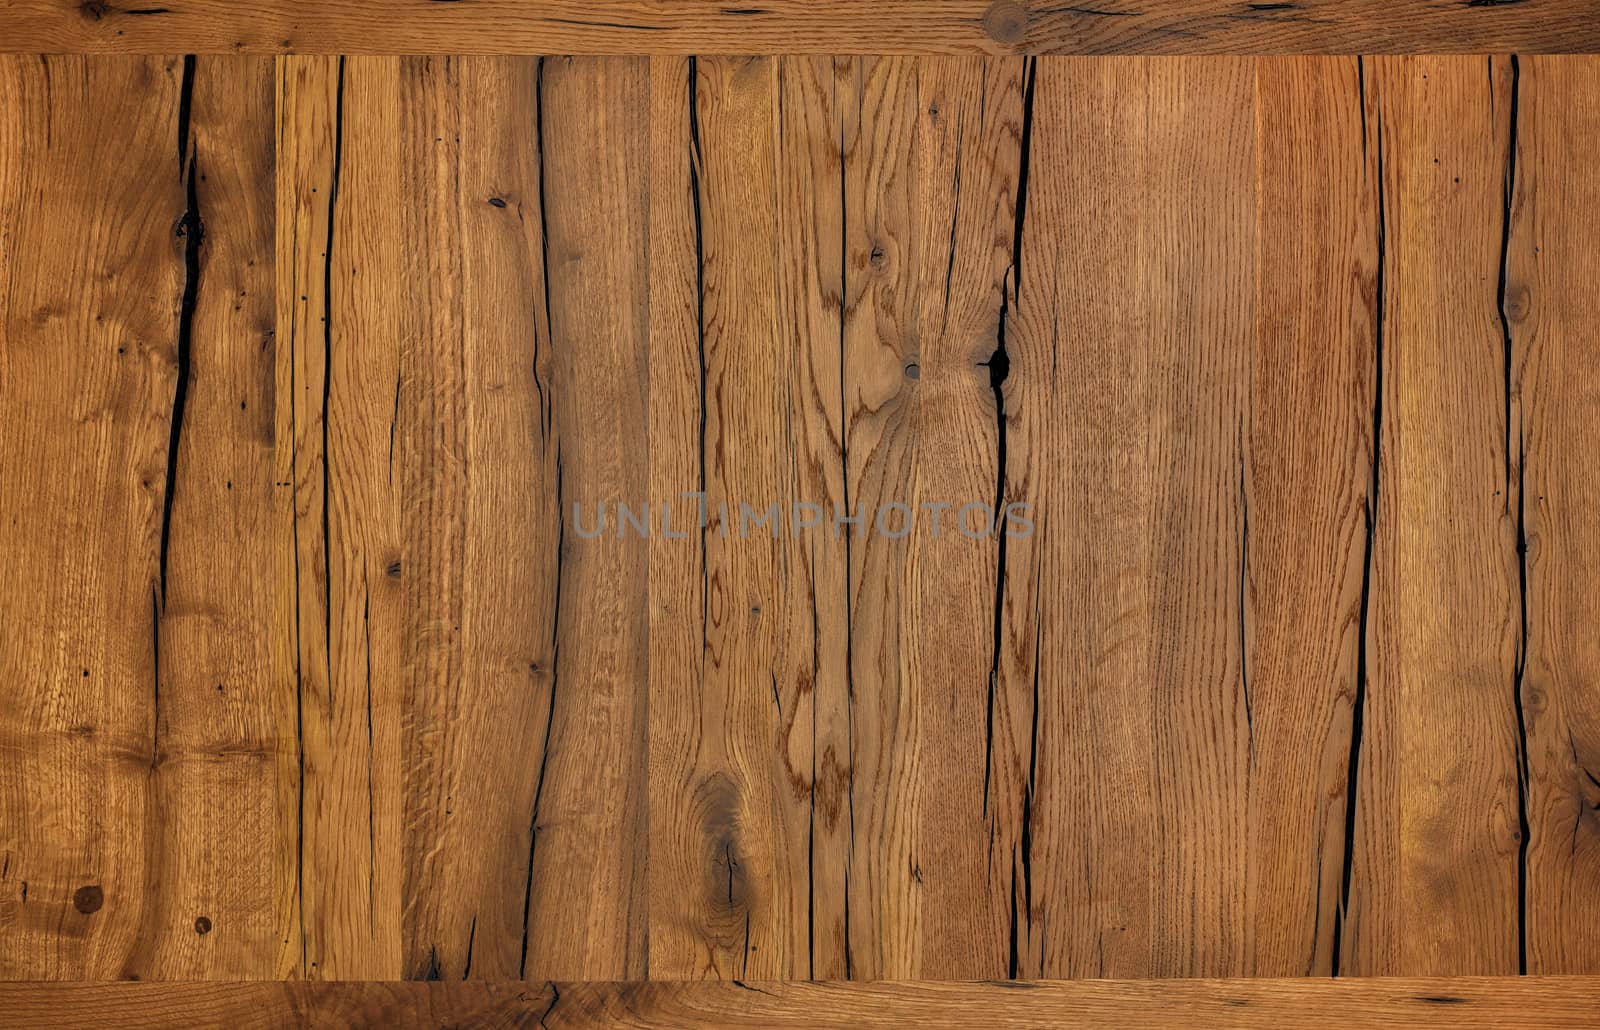 Old, cracked brown wooden background and texture treated with modern protective reagents and wax, high resolution.